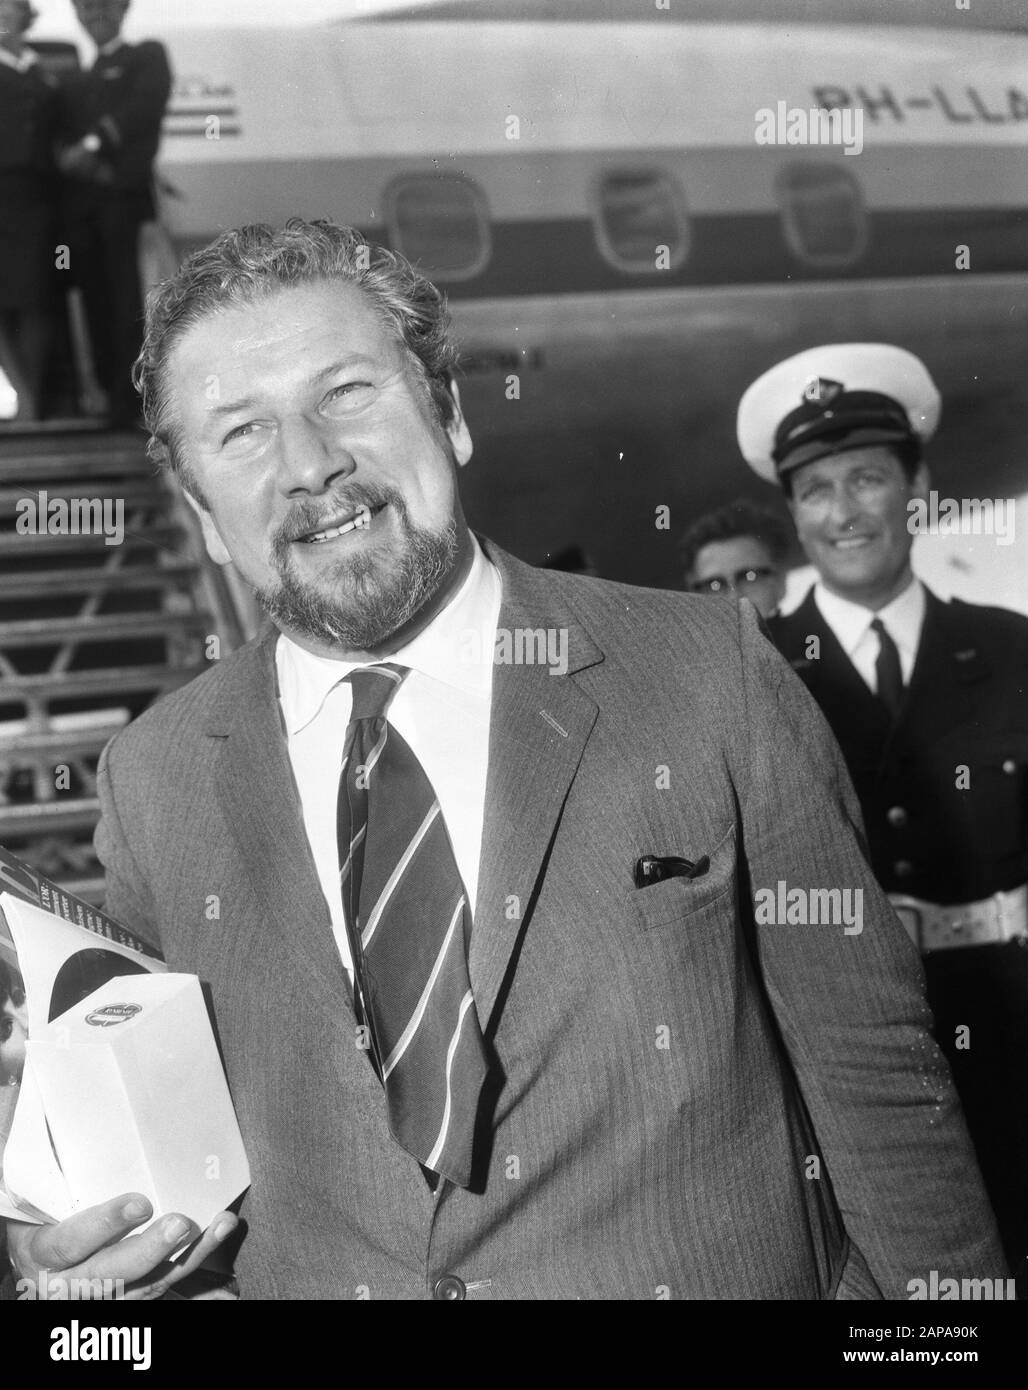 Arrival Charlie Chaplin and wife at Schiphol, Peter Ustinov (kop) Date: 23 June 1965 Location: Noord-Holland, Schiphol Keywords: arrivals, actors Personal name: Ustinov, Peter Stock Photo